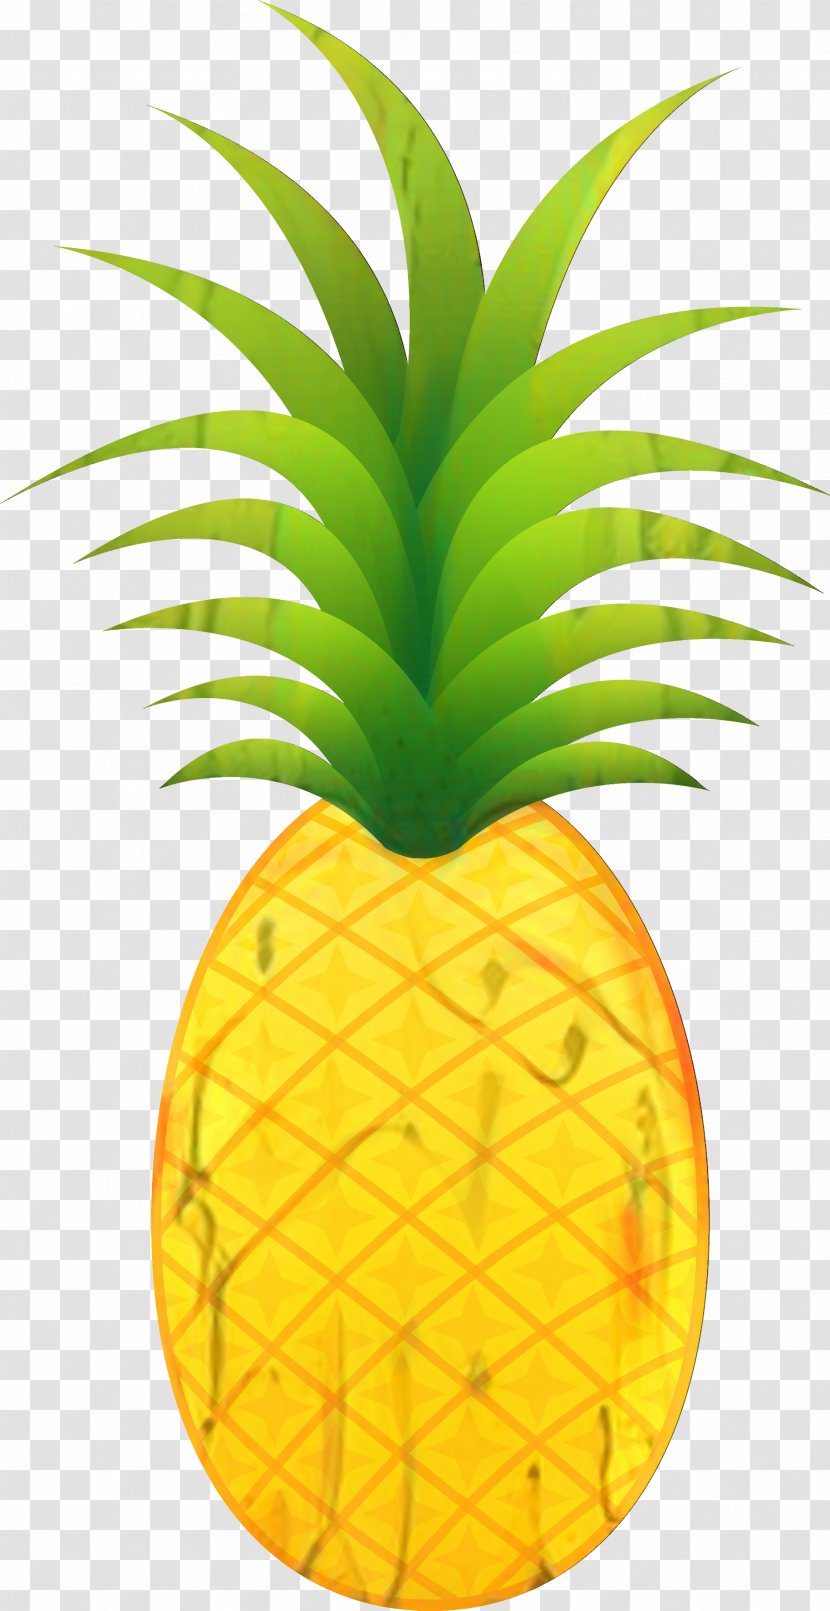 Pineapple Clip Art Image Transparency - Juice - Pineapples Transparent PNG